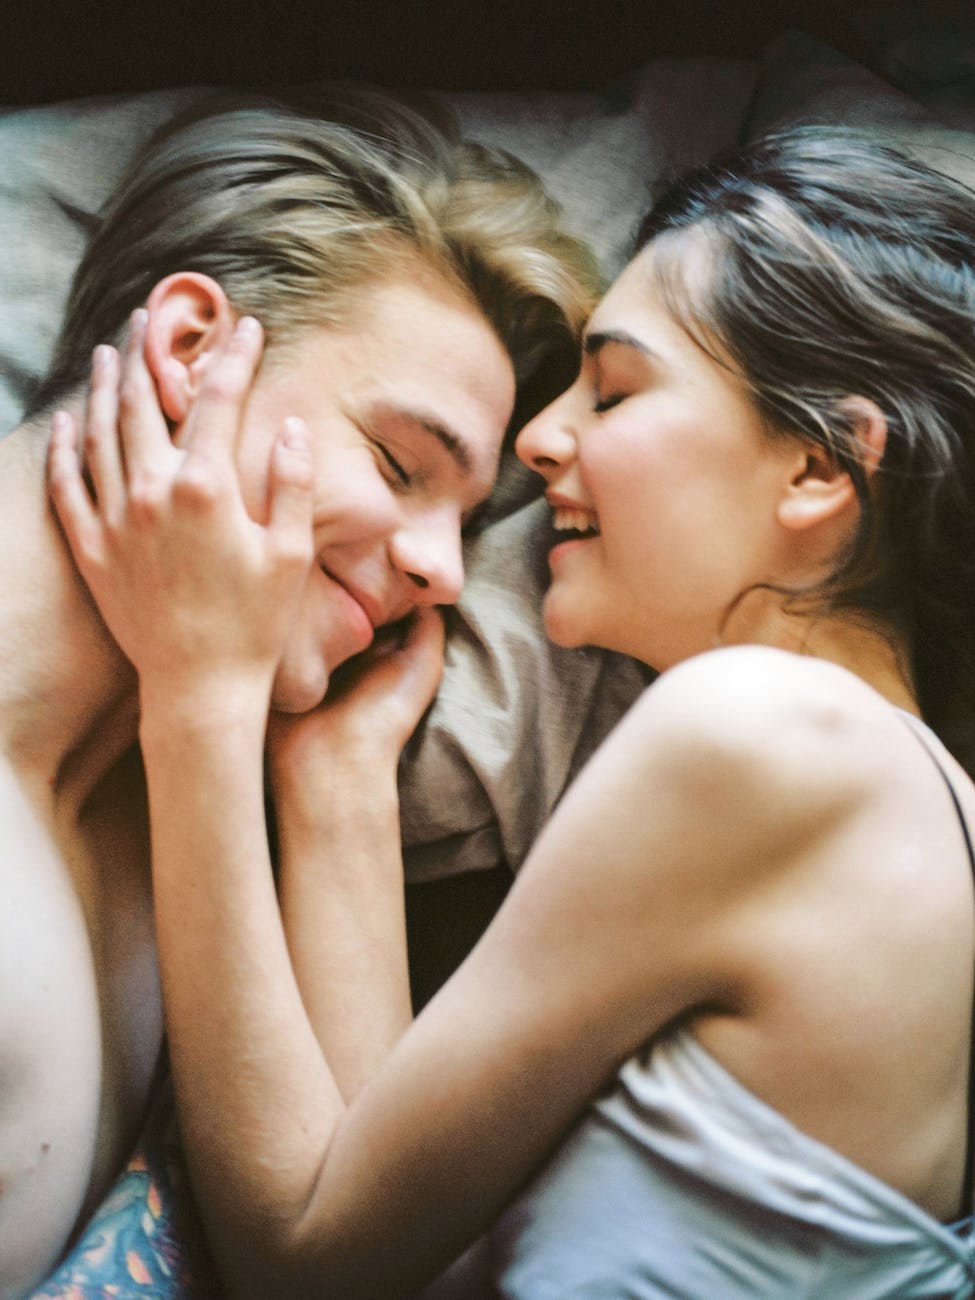 Adult affection bed closeness thriving relationship